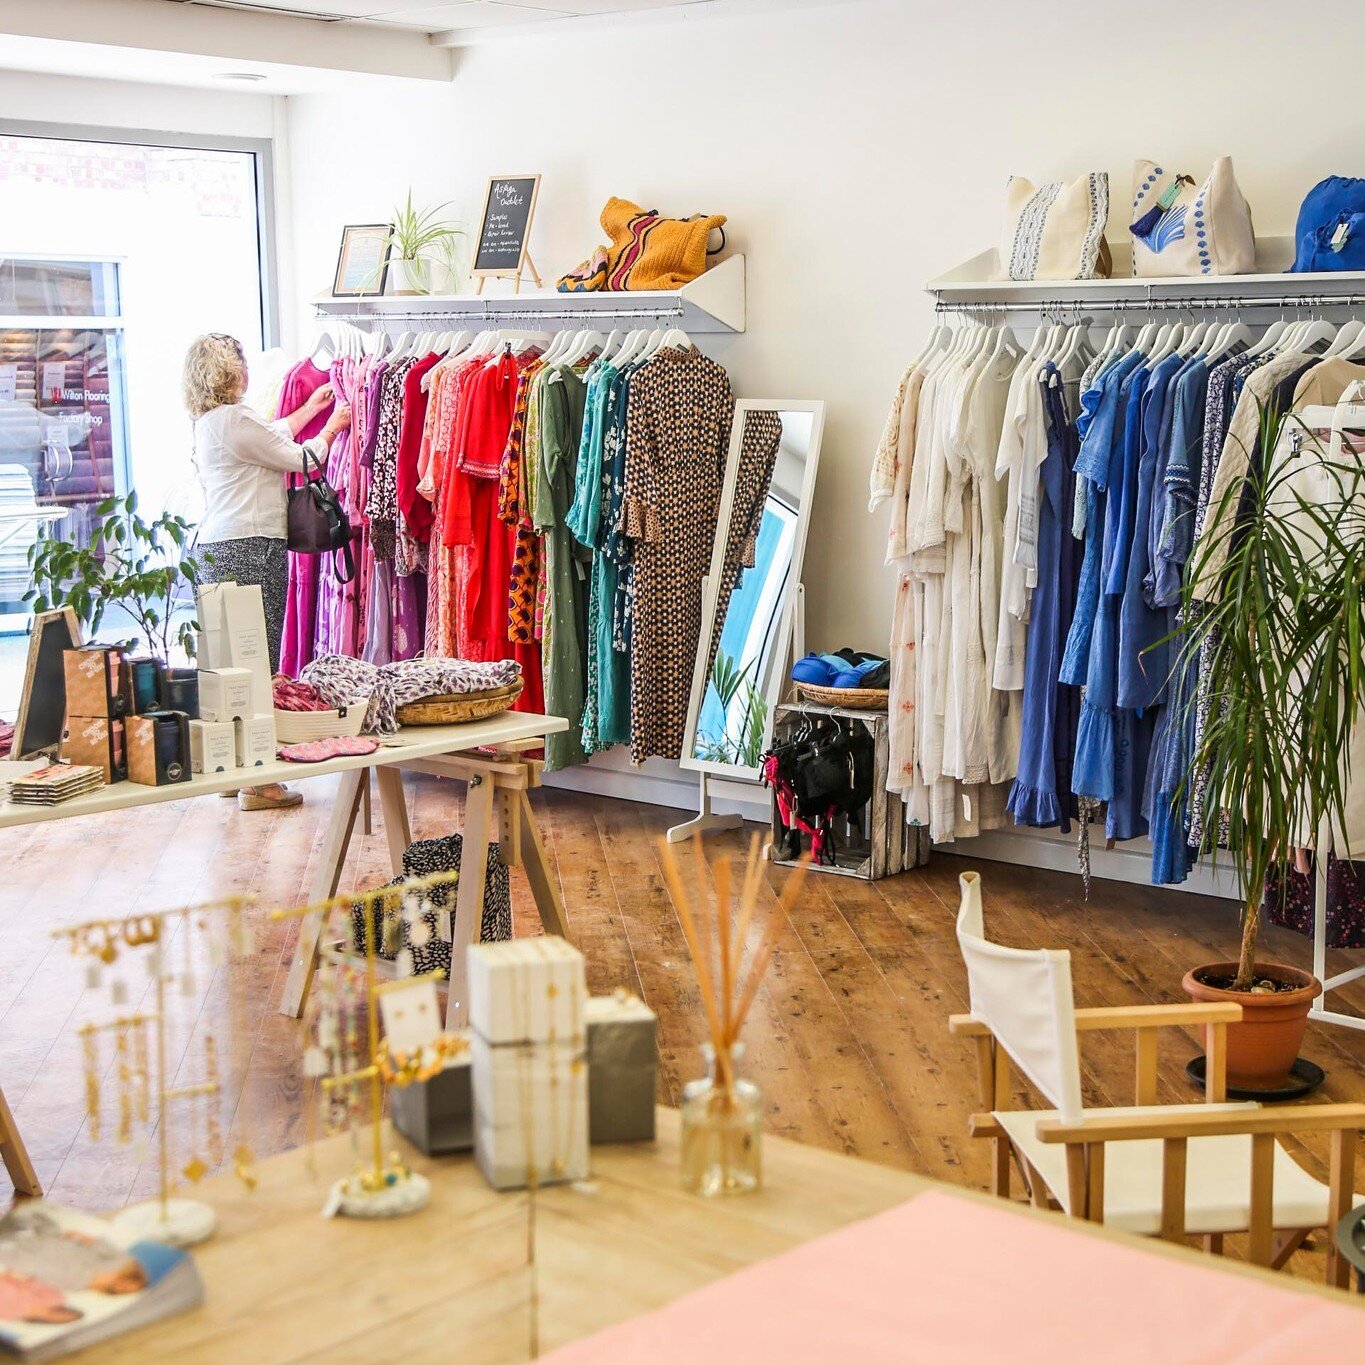 Check out Aspiga's sample and discounted sale this Friday and Saturday at their beautiful new shop at The Guild in New Square! 

You can grab great deals on shop samples and seasonal promotions, prices start from &pound;10. 

Please be aware that all